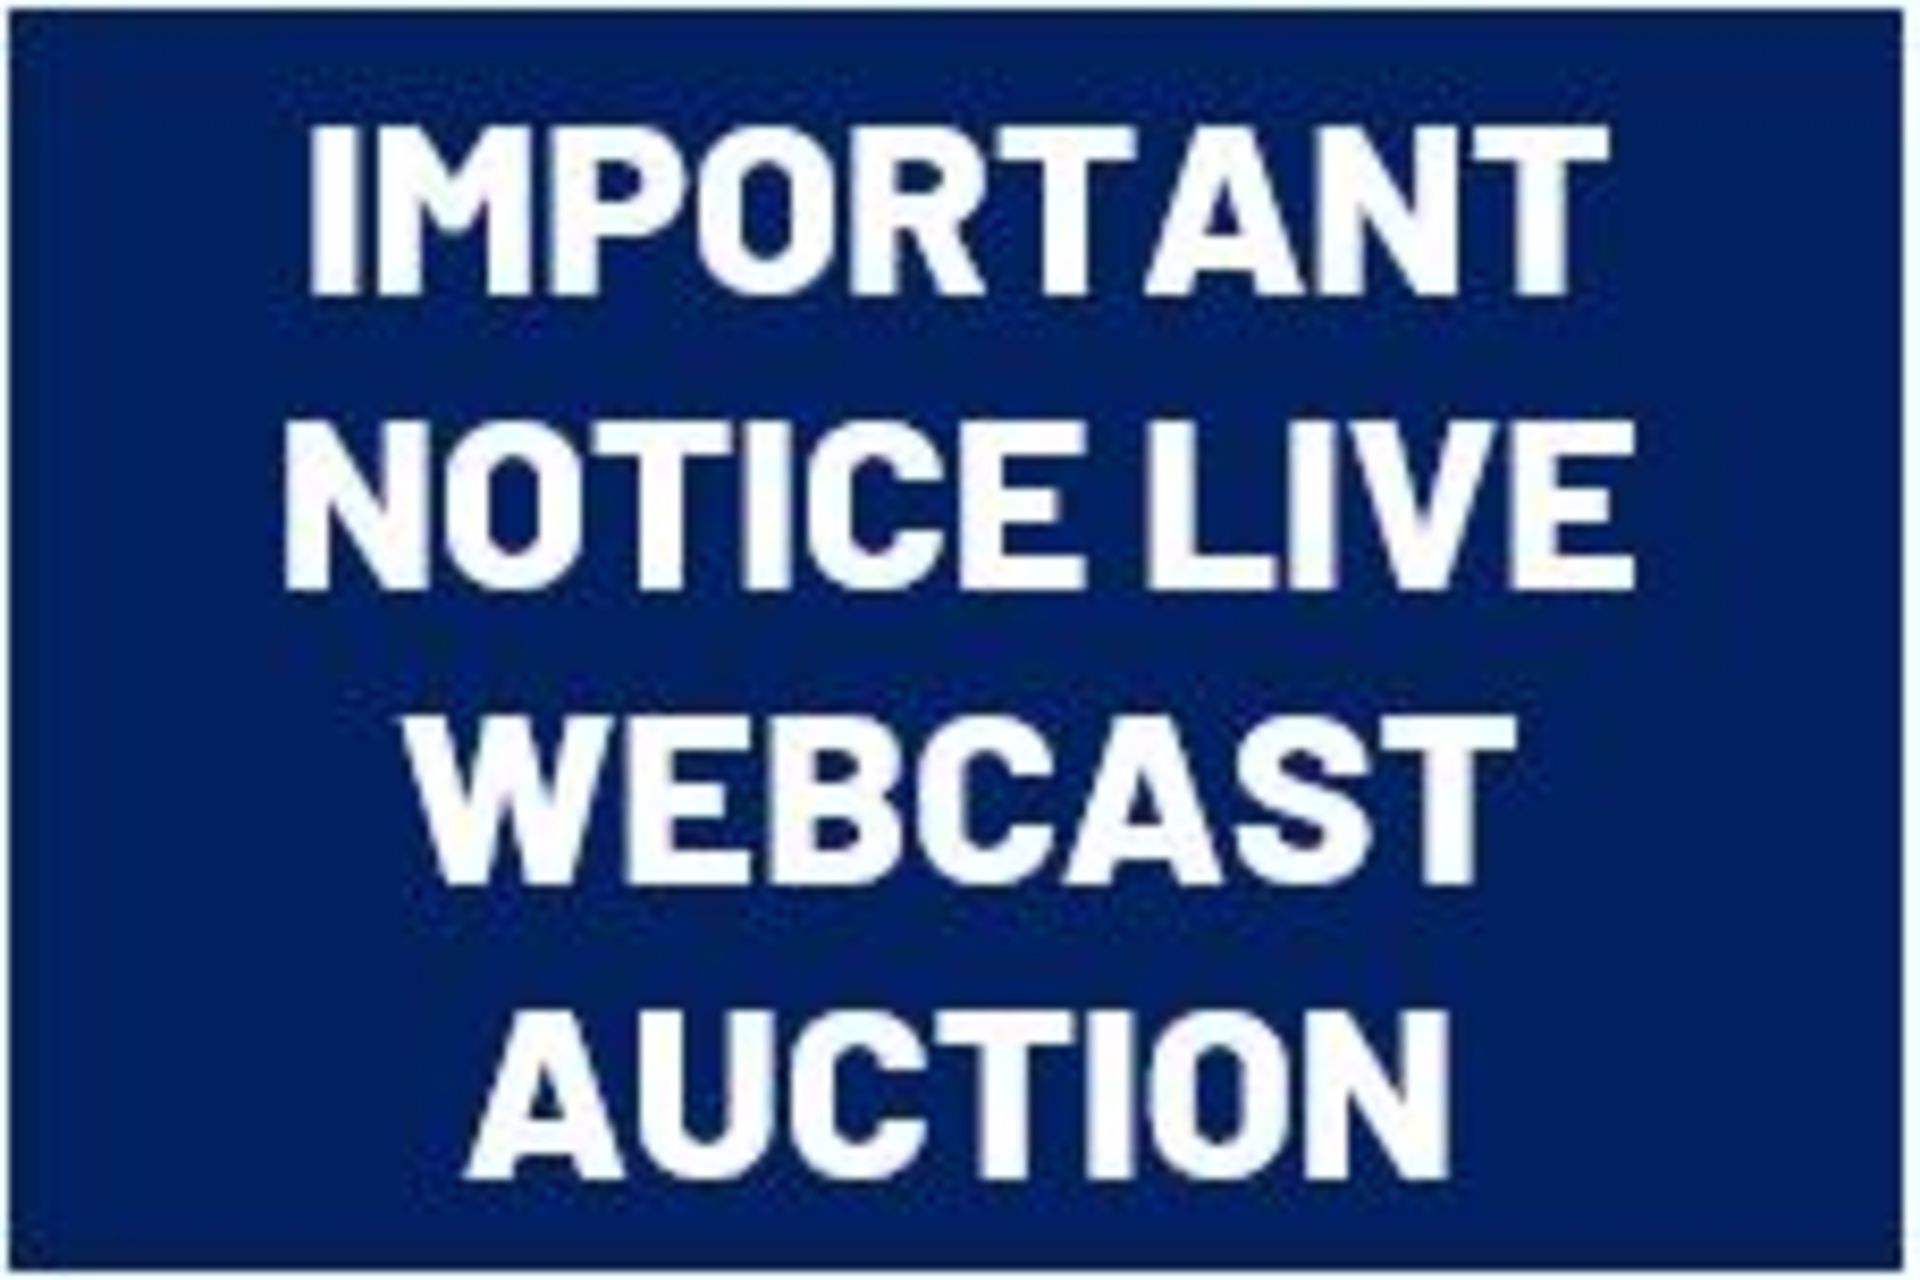 MPORTANT NOTICE – This is a live webcast auction (not a timed online auction).